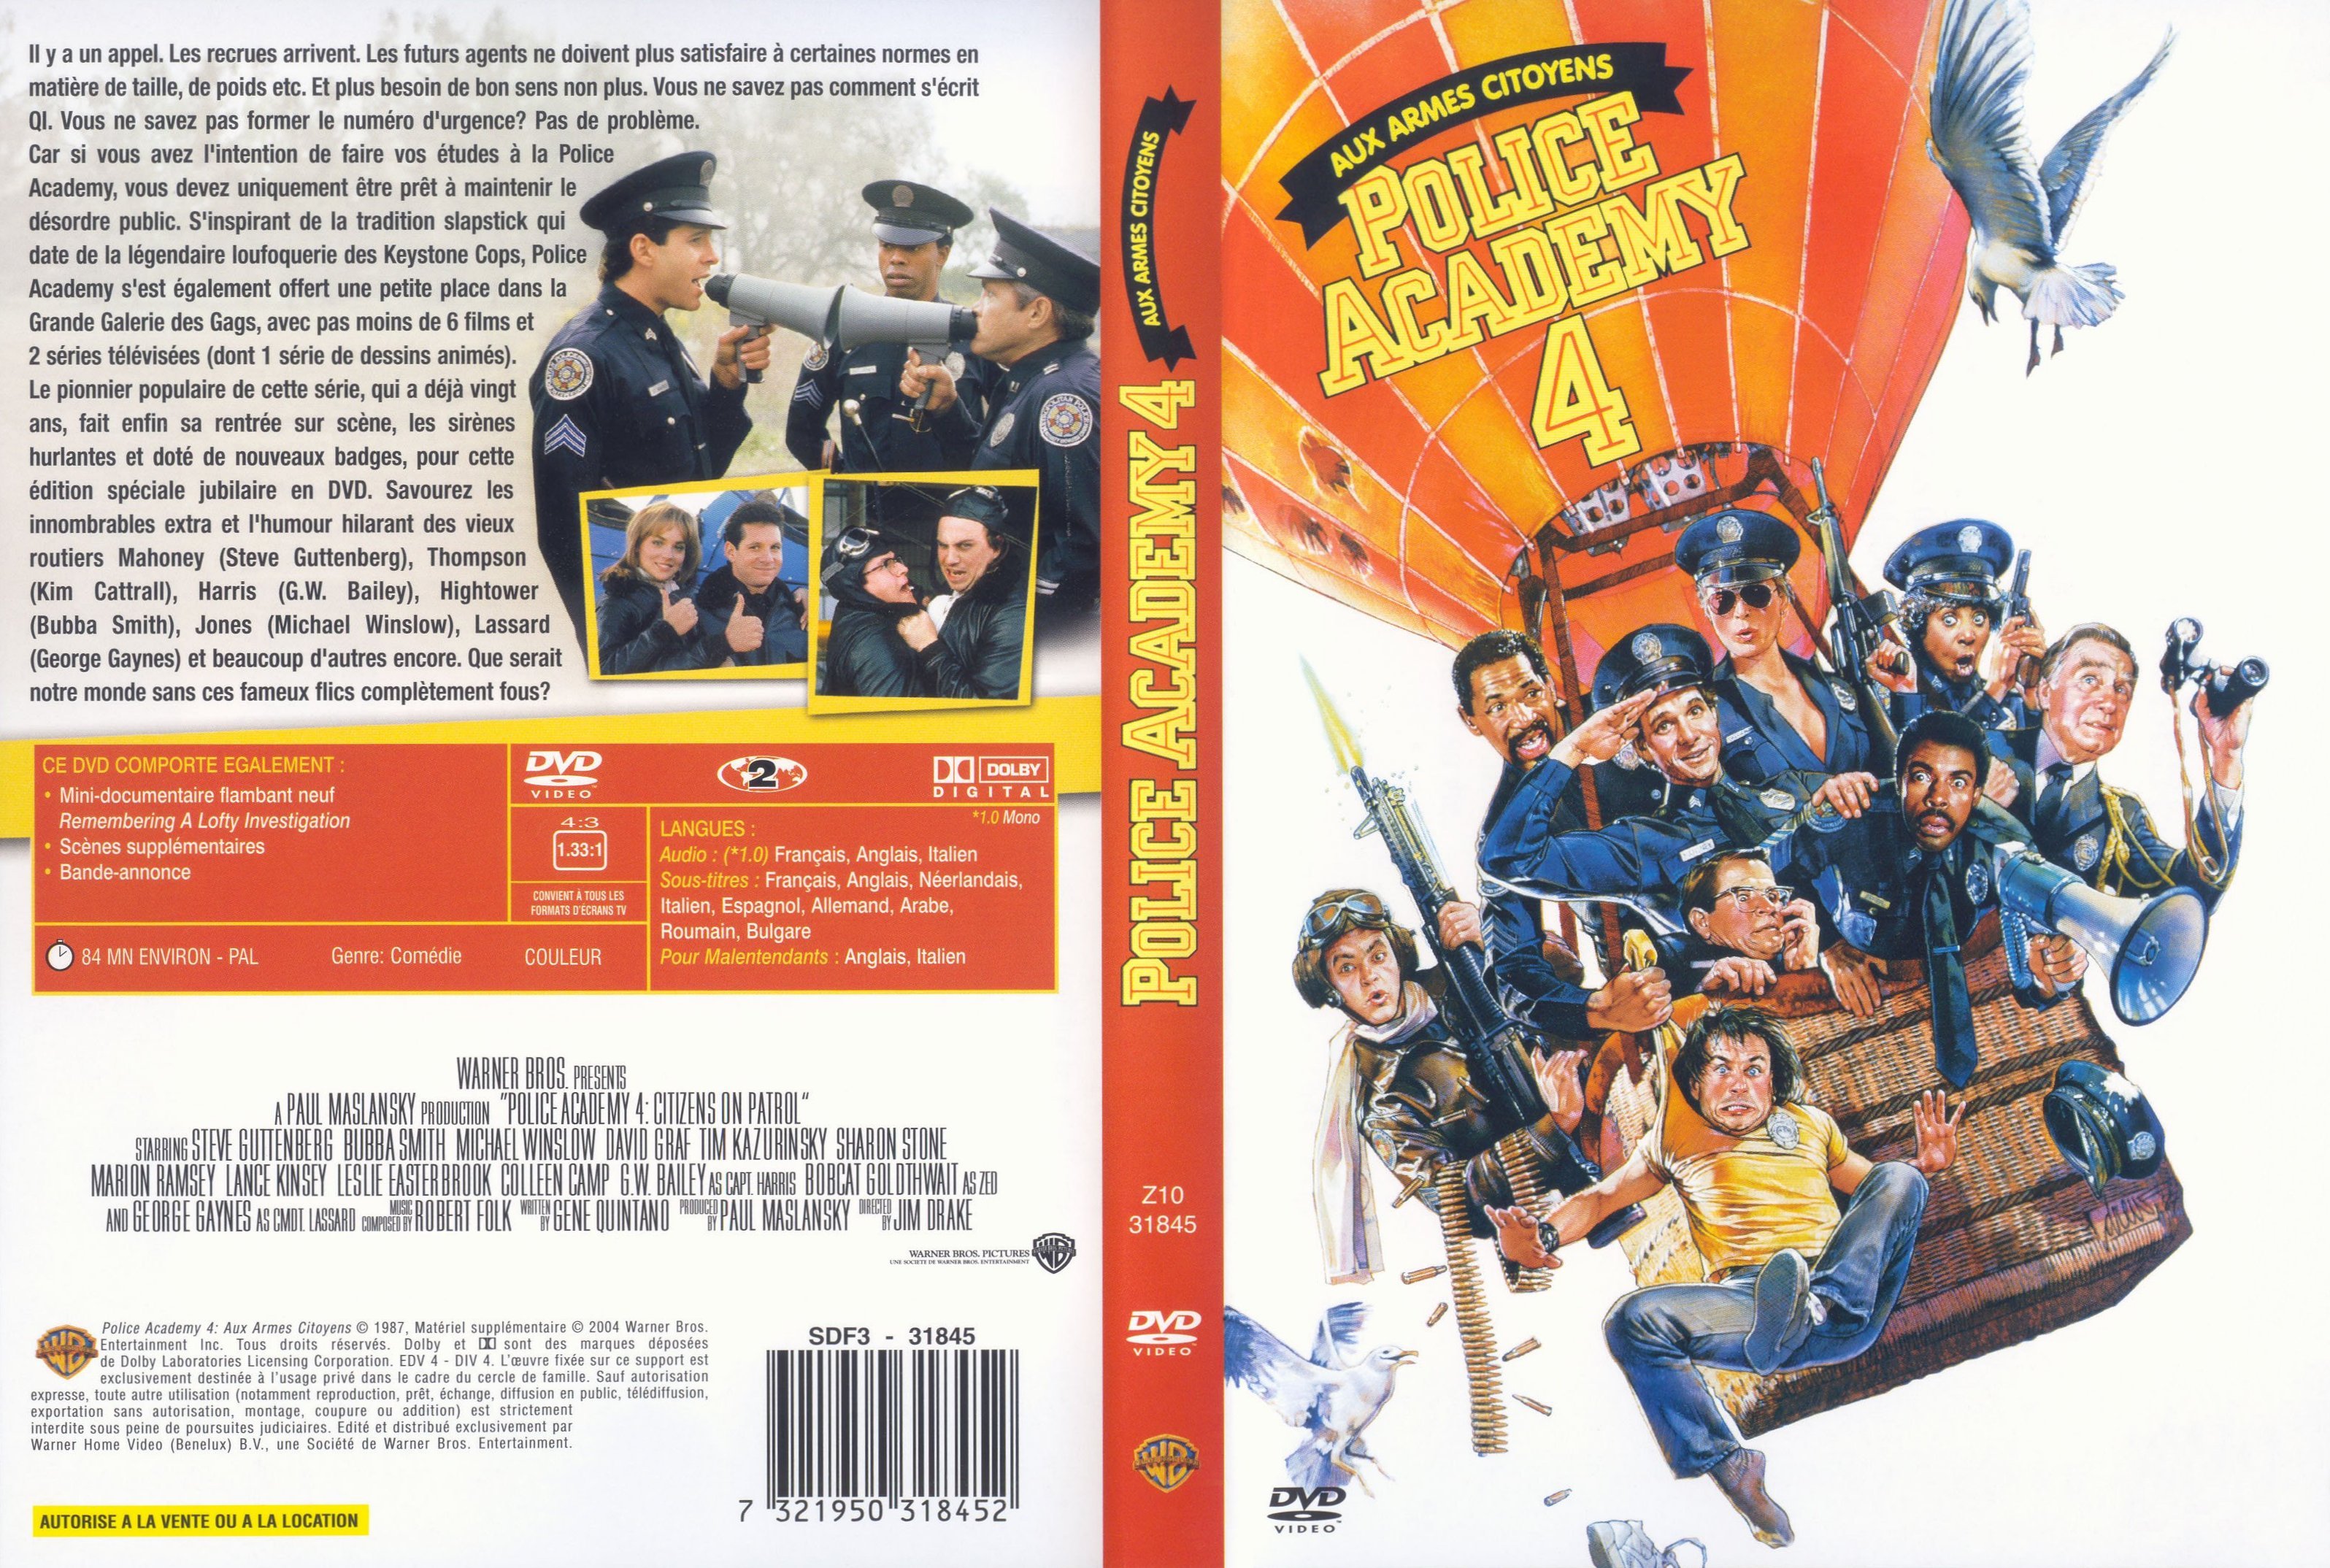 Jaquette DVD Police academy 4